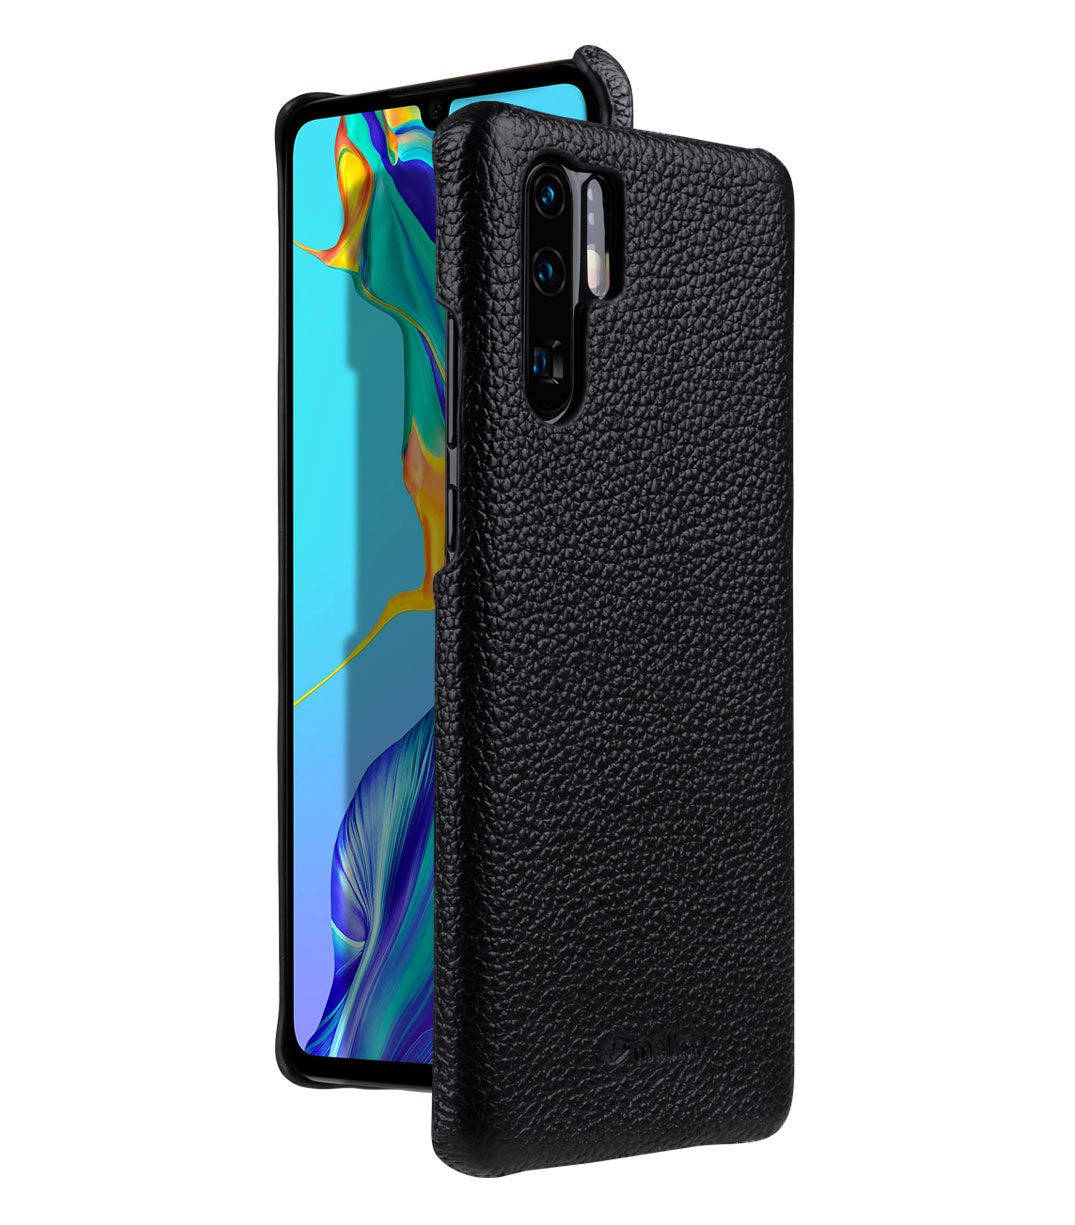 Leather Snap Cover Case for Huawei P30 Pro – Melkco Phone Accessories